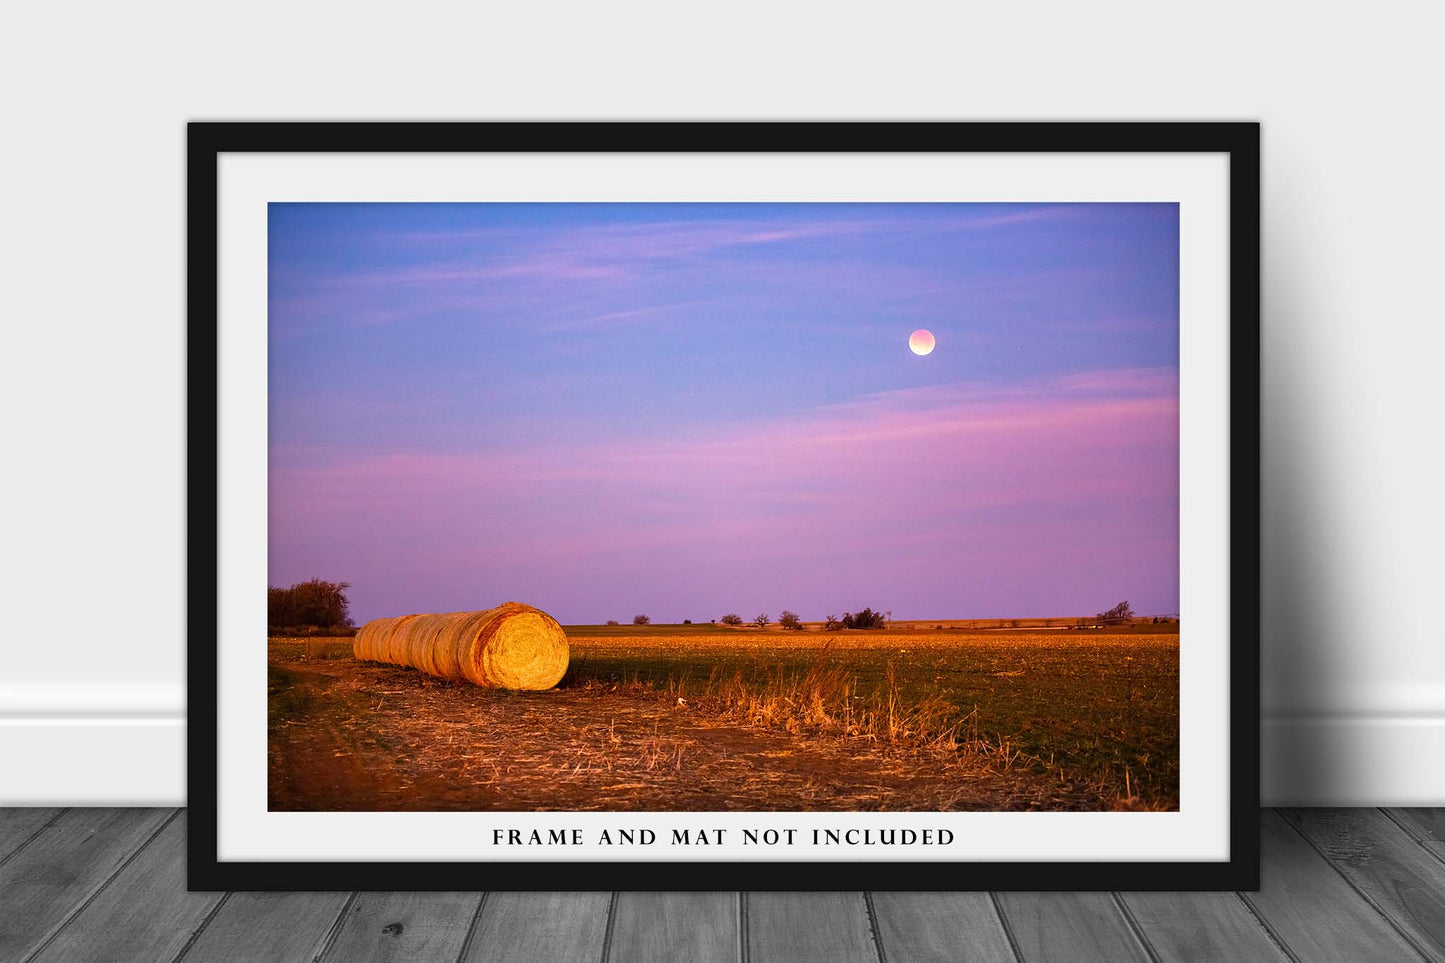 Country Wall Art - Picture of Round Hay Bales Under Blood Moon in Oklahoma - Celestial Farm Photography Photo Print Artwork Decor